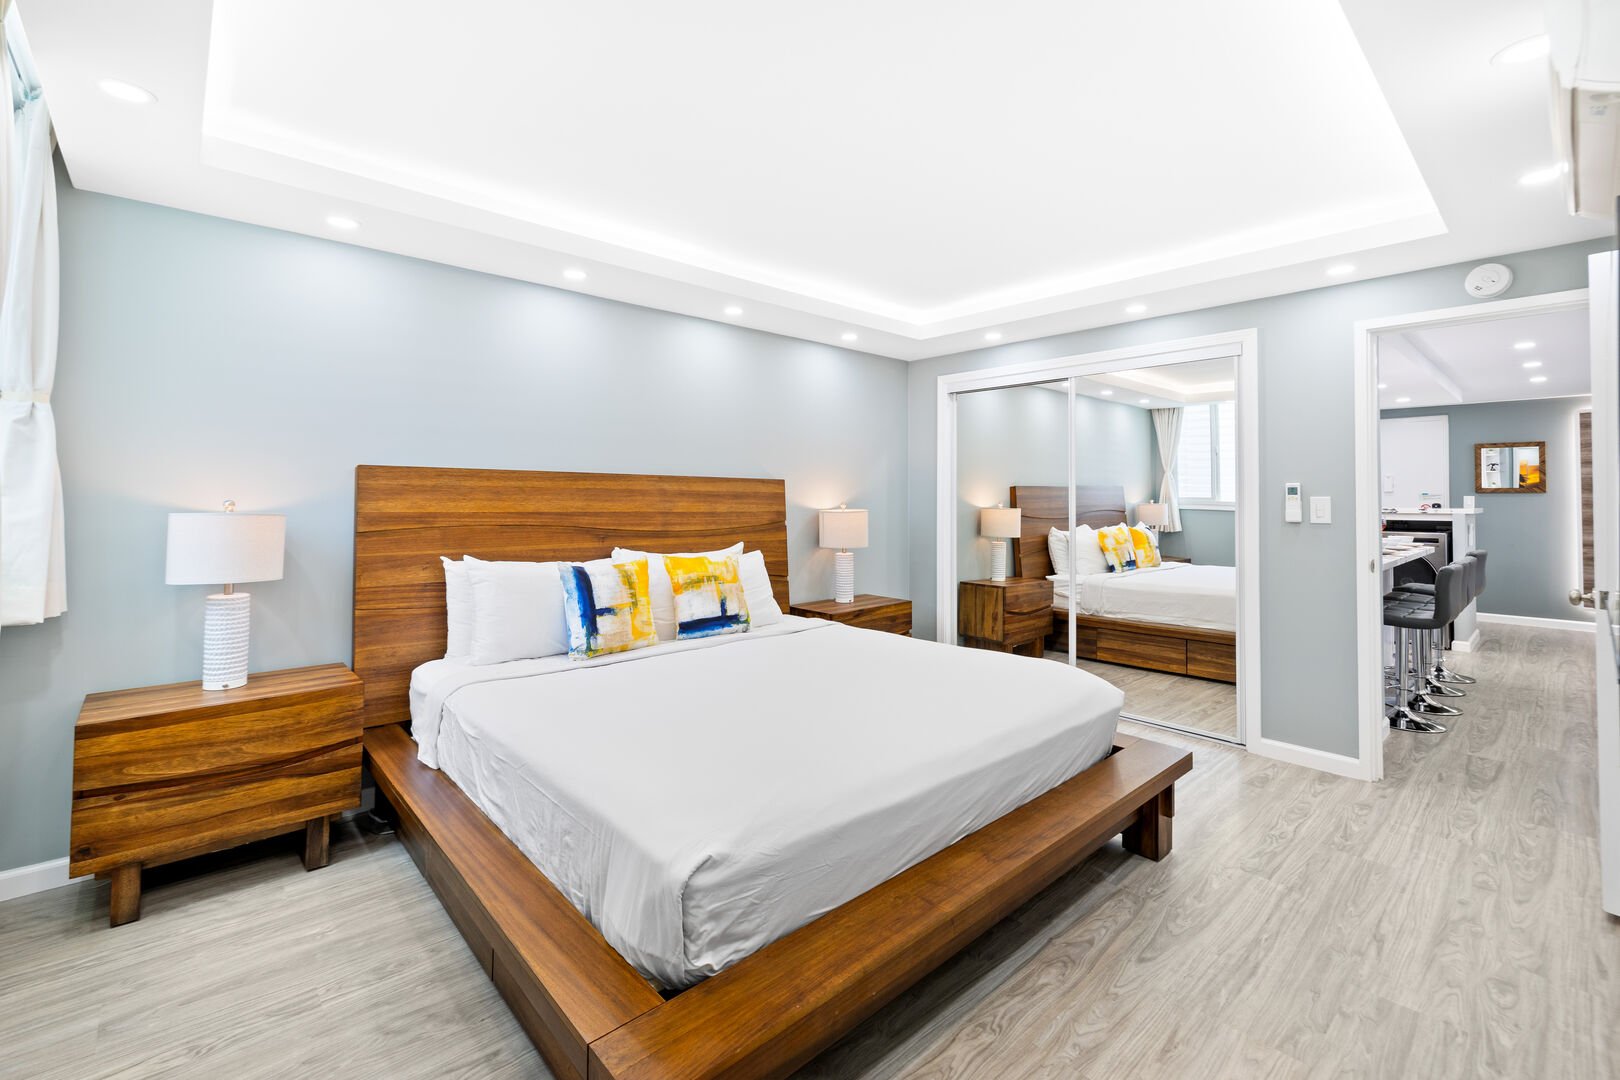 The master bedroom features a king-size bed, 2 nightstands, flat screen TV, own bathroom, and a split AC!